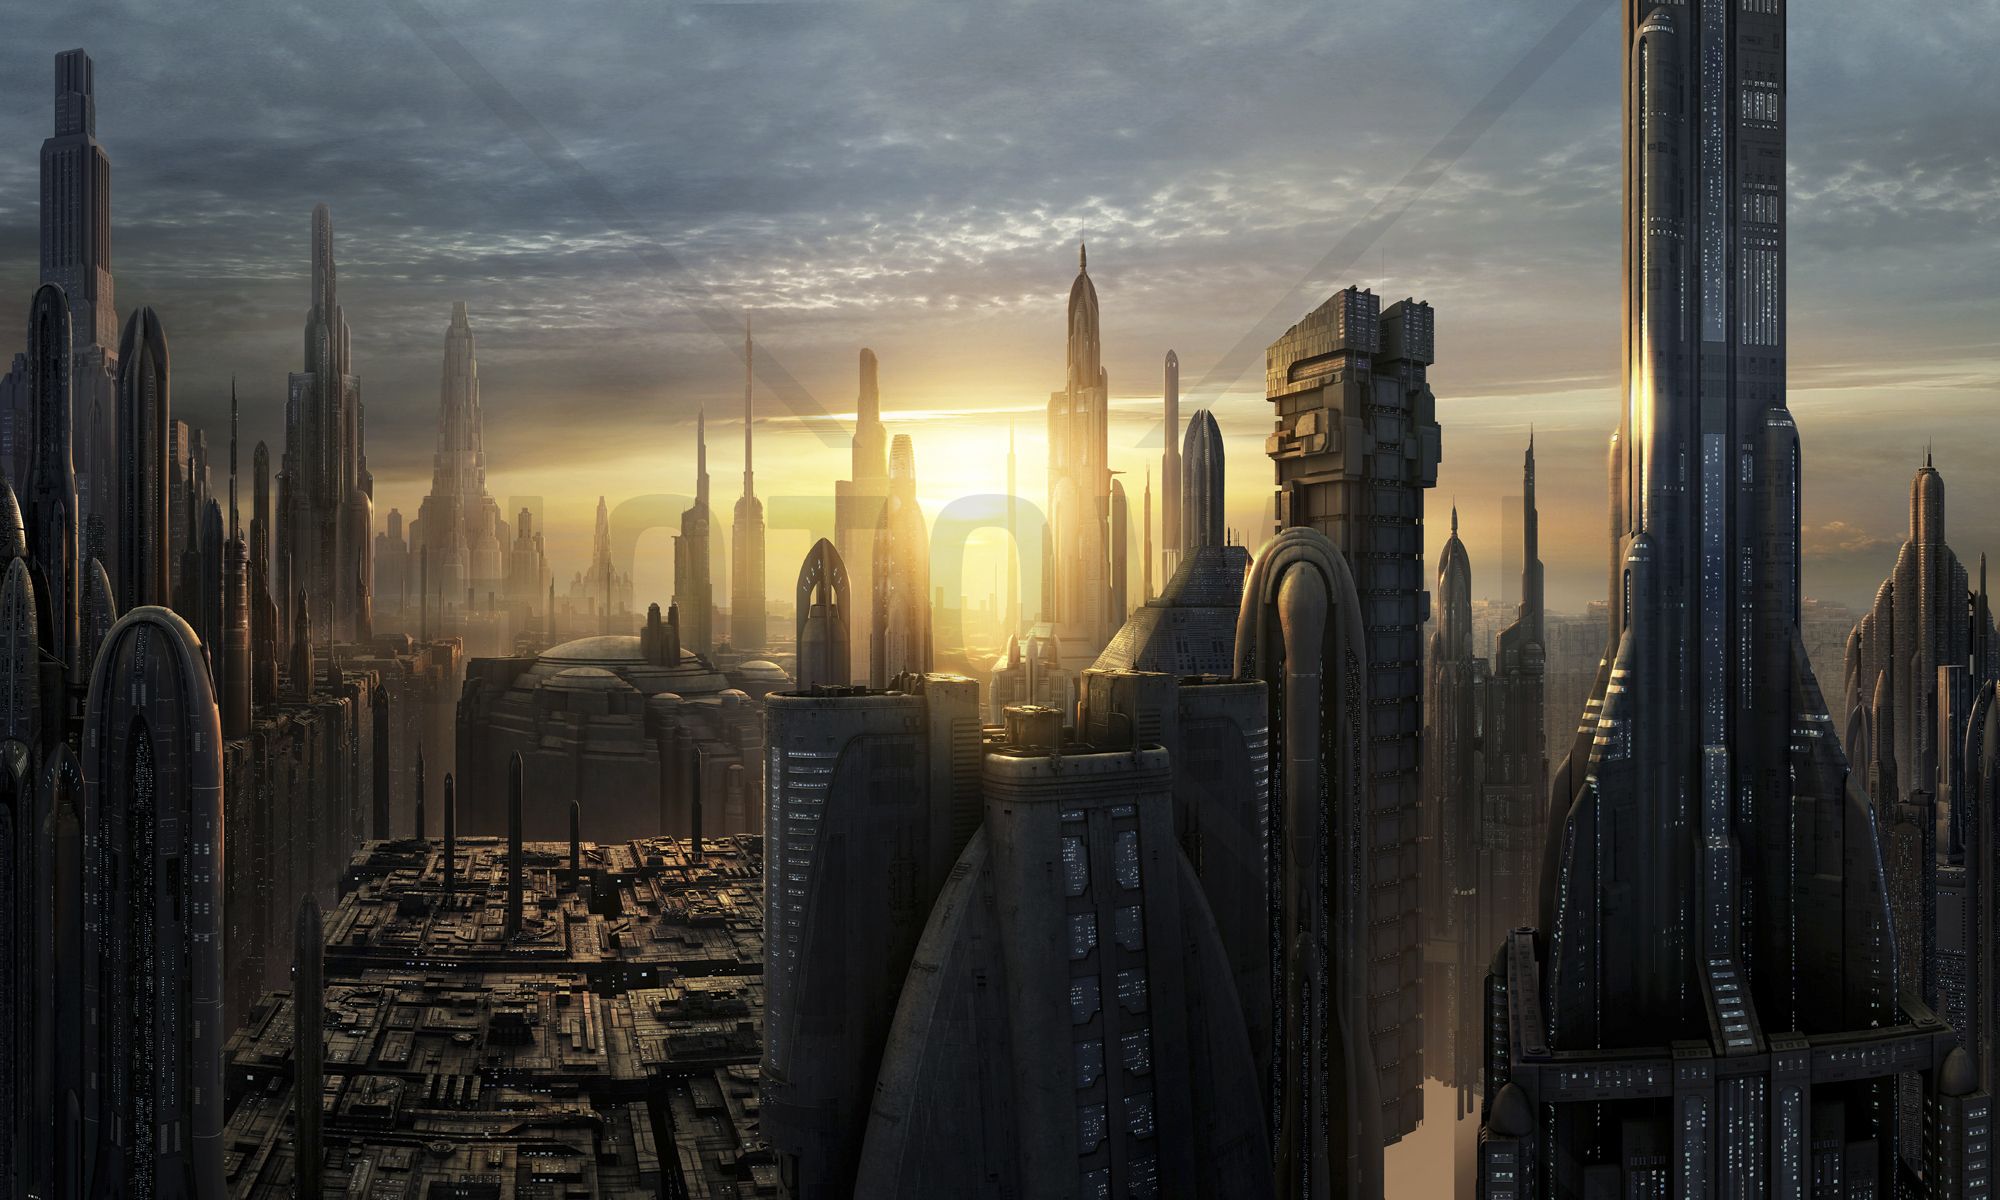 Star Wars - Coruscant Buildings Sunset - Wall Mural & Photo